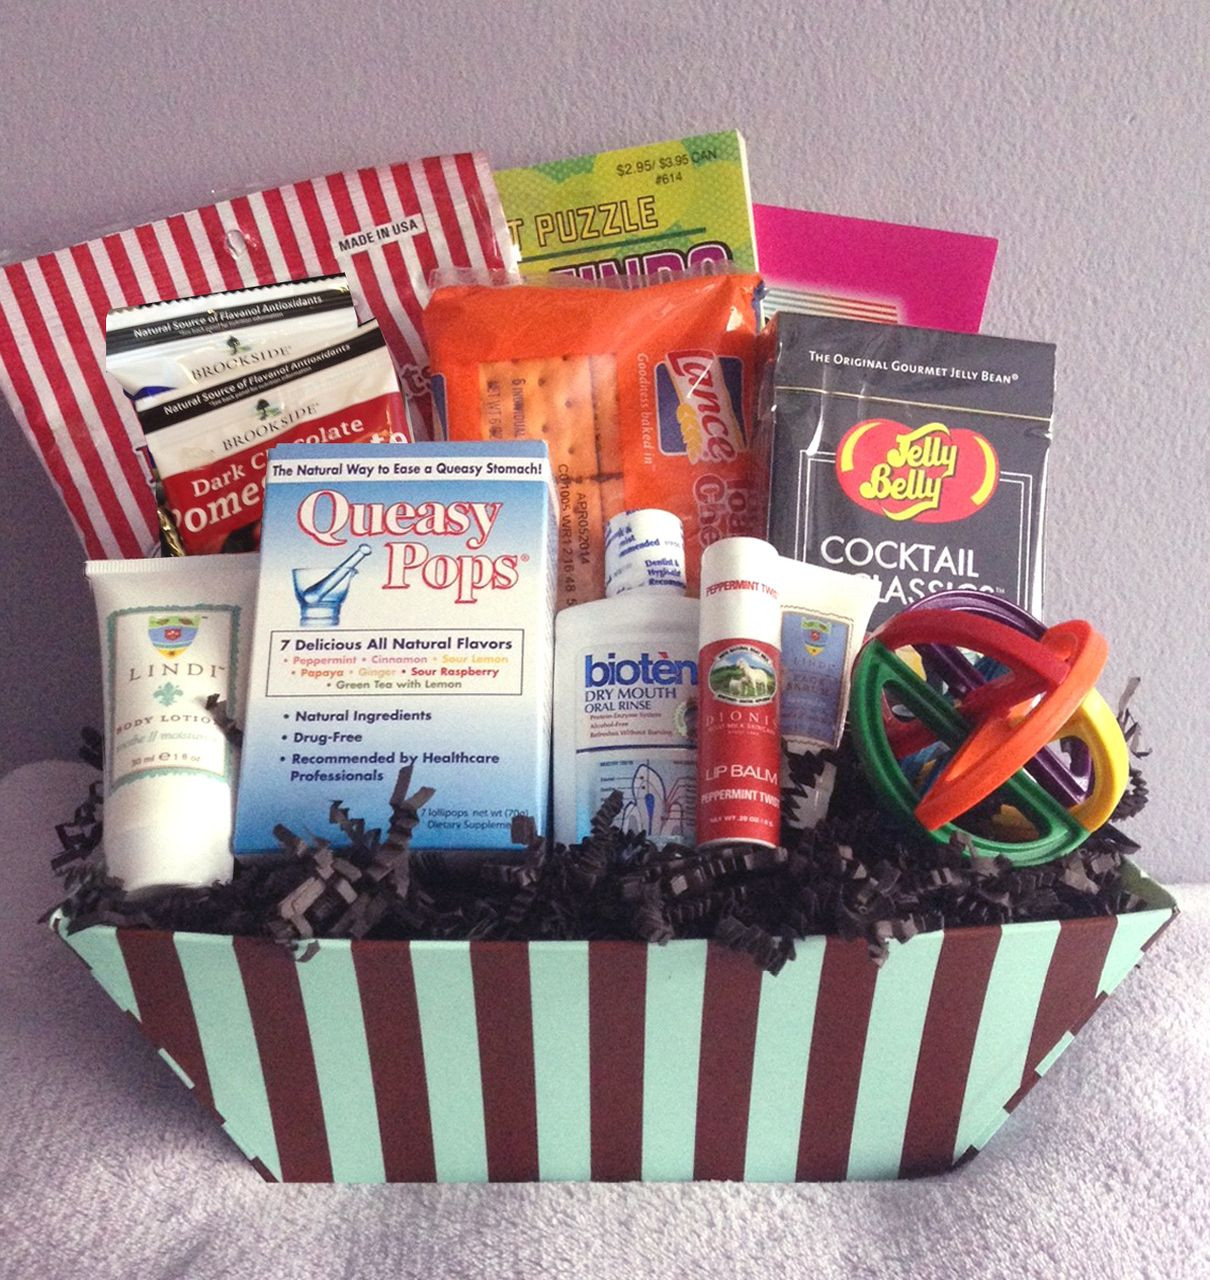 Gift Basket Ideas For Cancer Patients
 Men s Small Chemo Basket Care package ideas